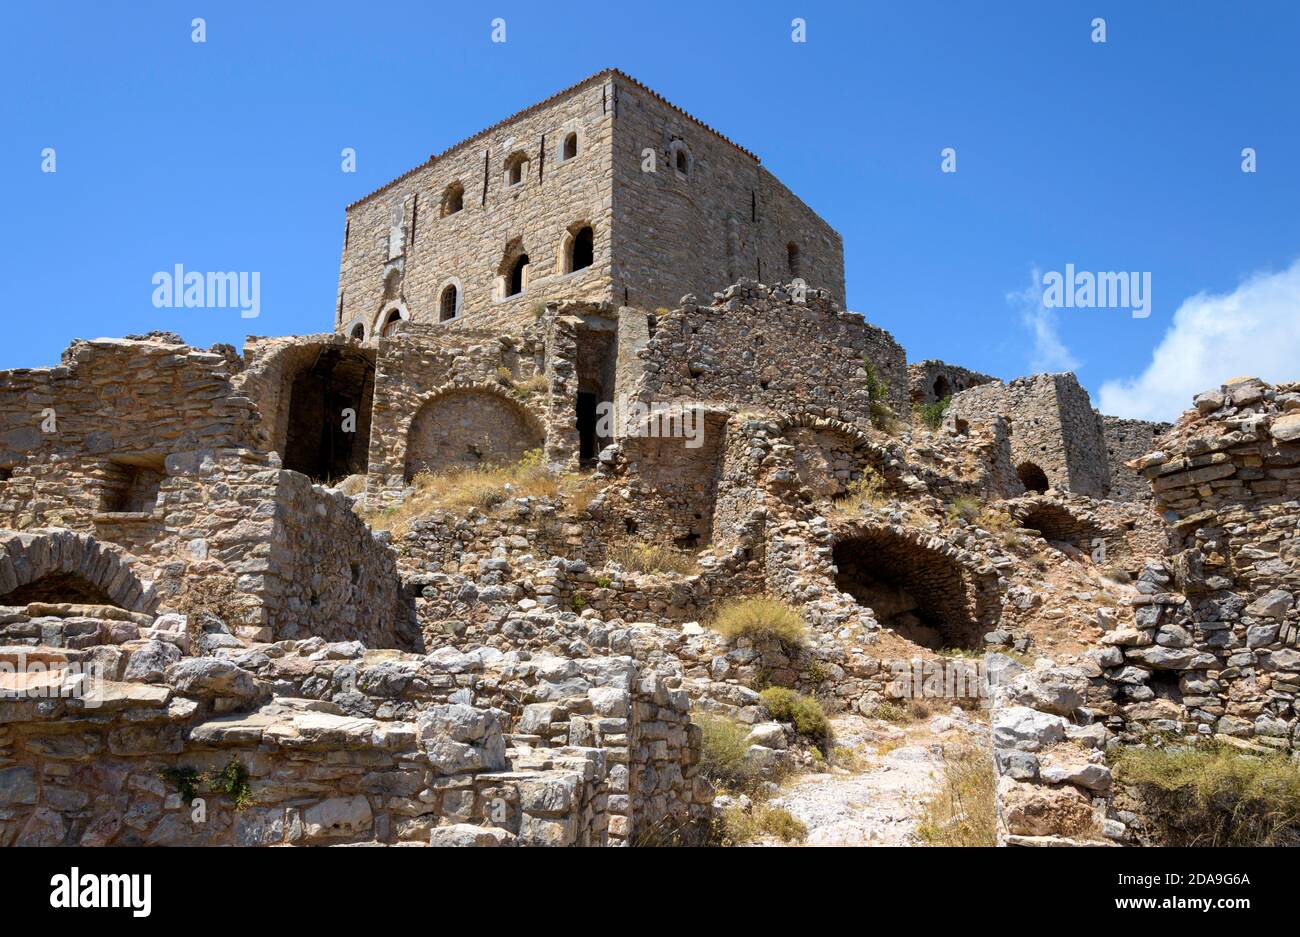 Abandoned and ruined stone houses in Anavatos village, Chios island, Greece  Stock Photo - Alamy